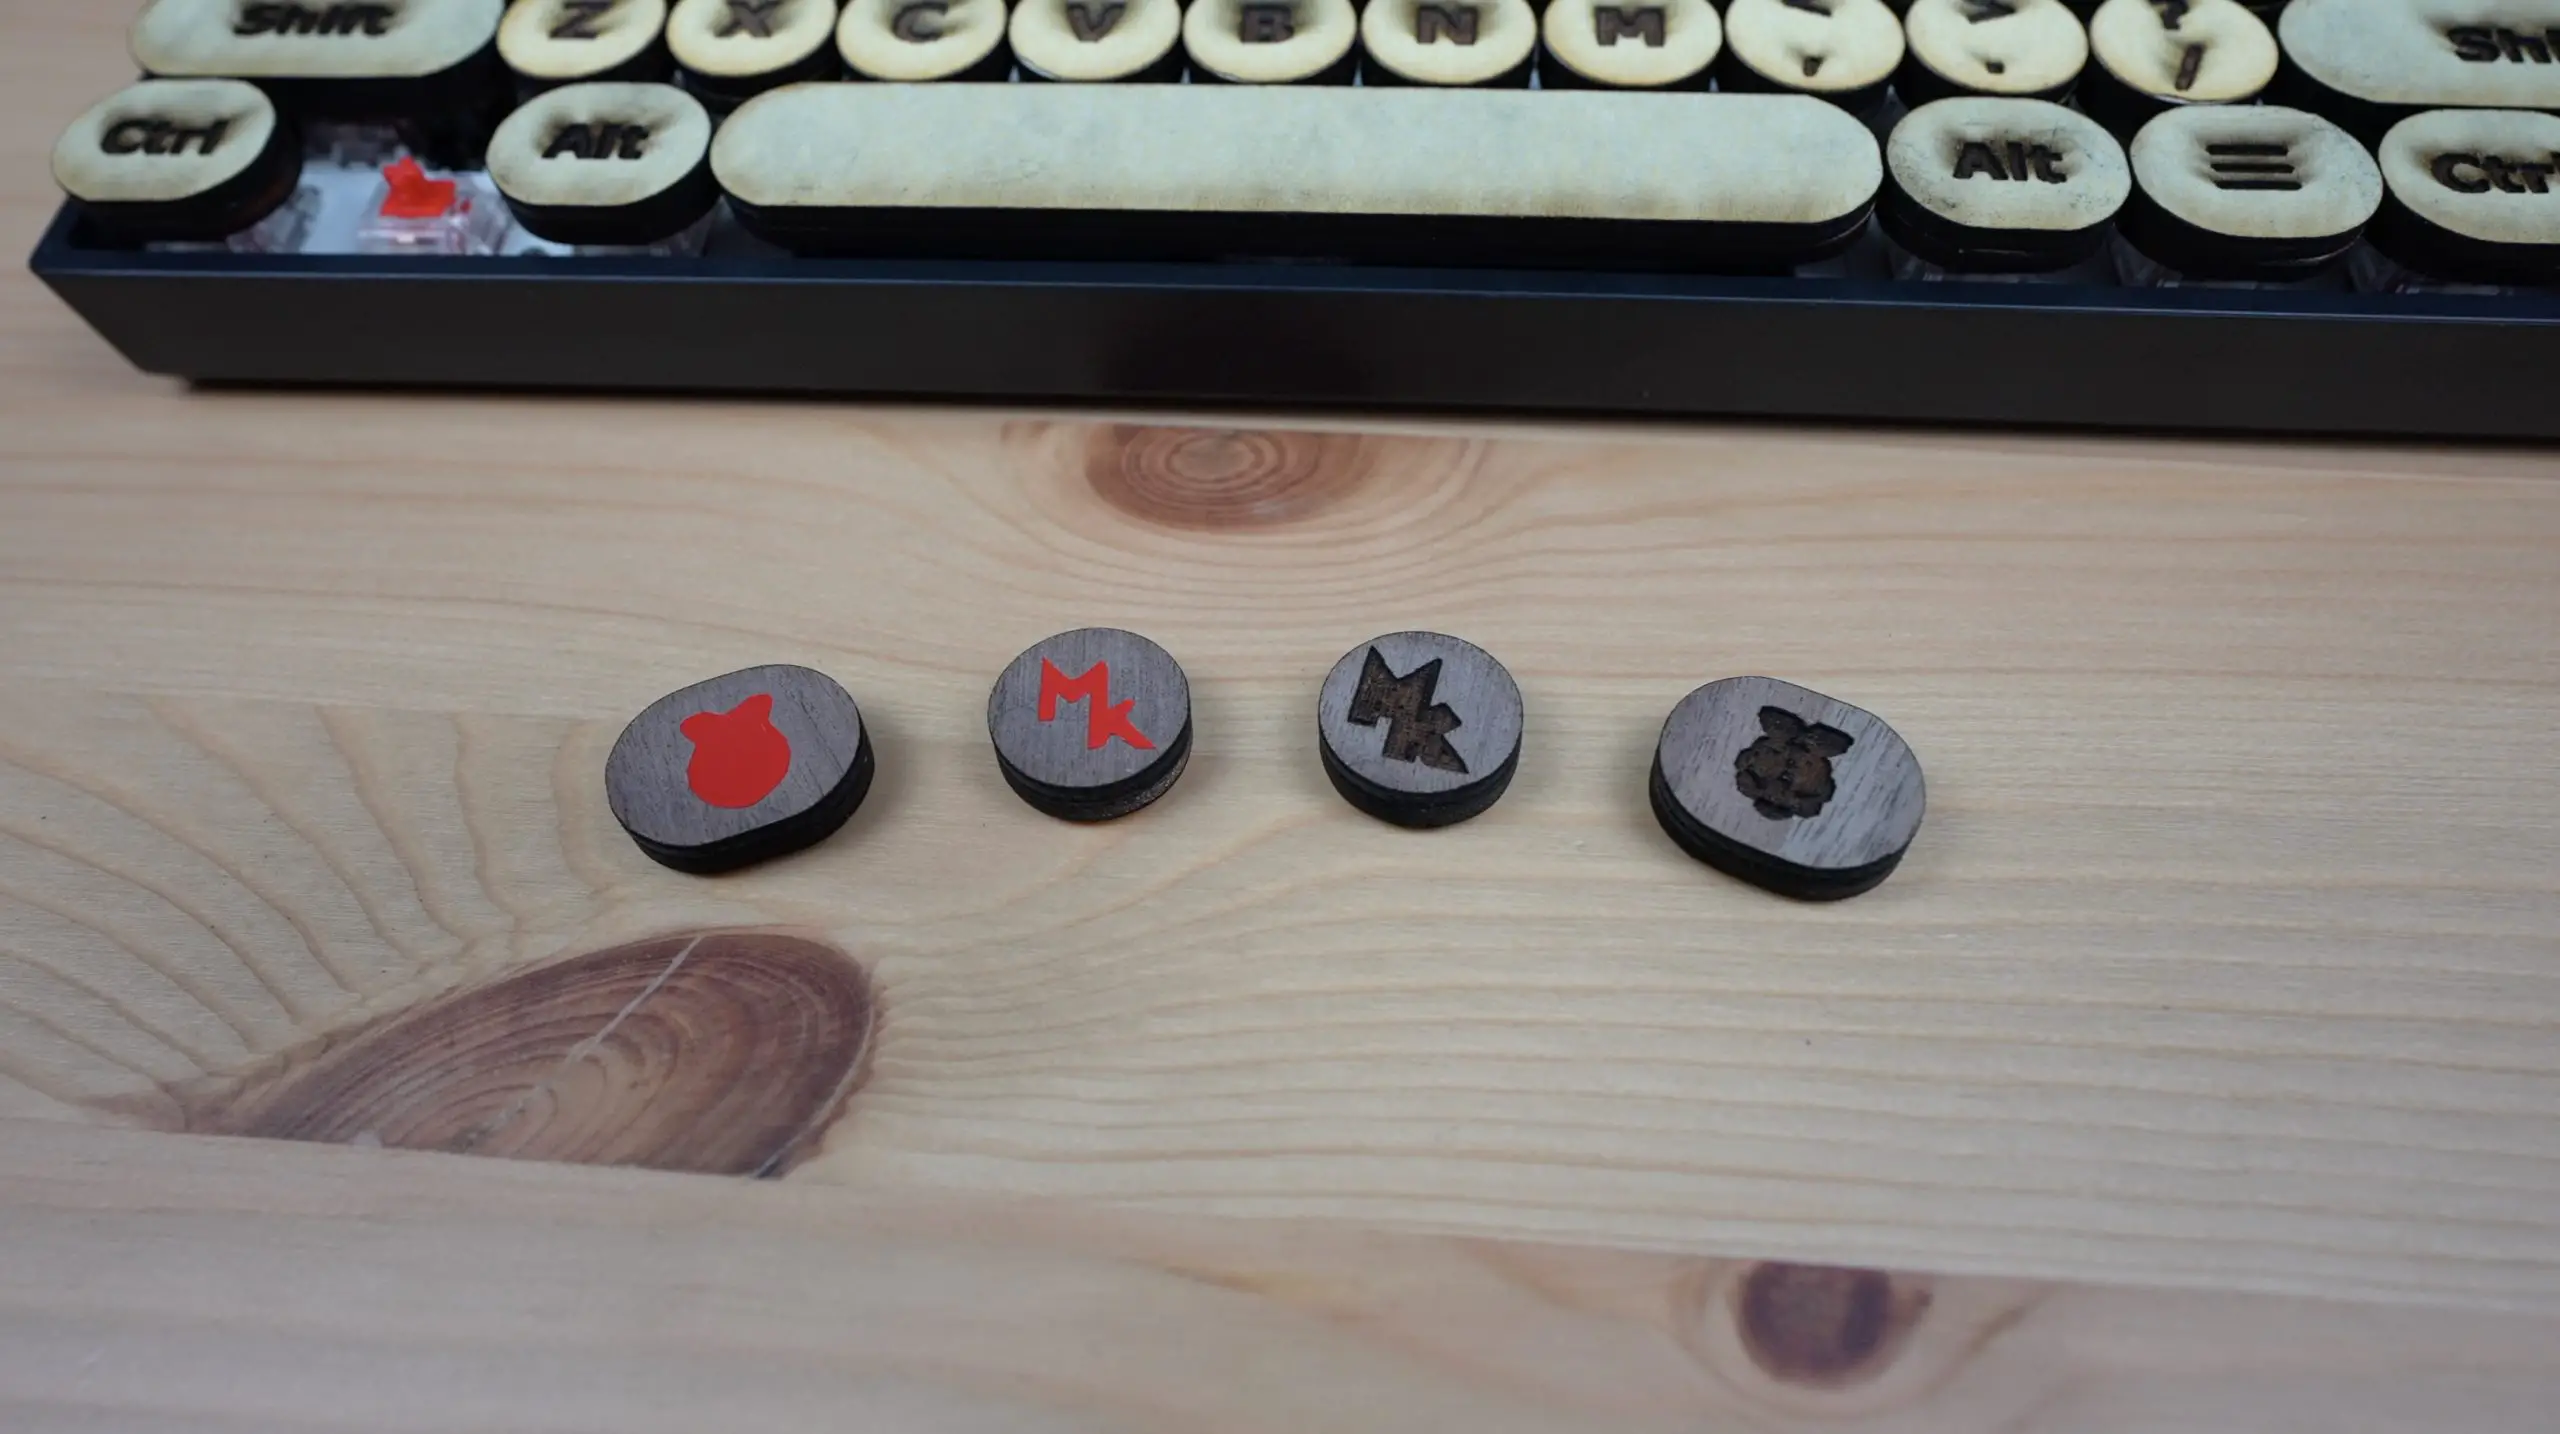 Decals Placed Onto Laser Cut Keycaps